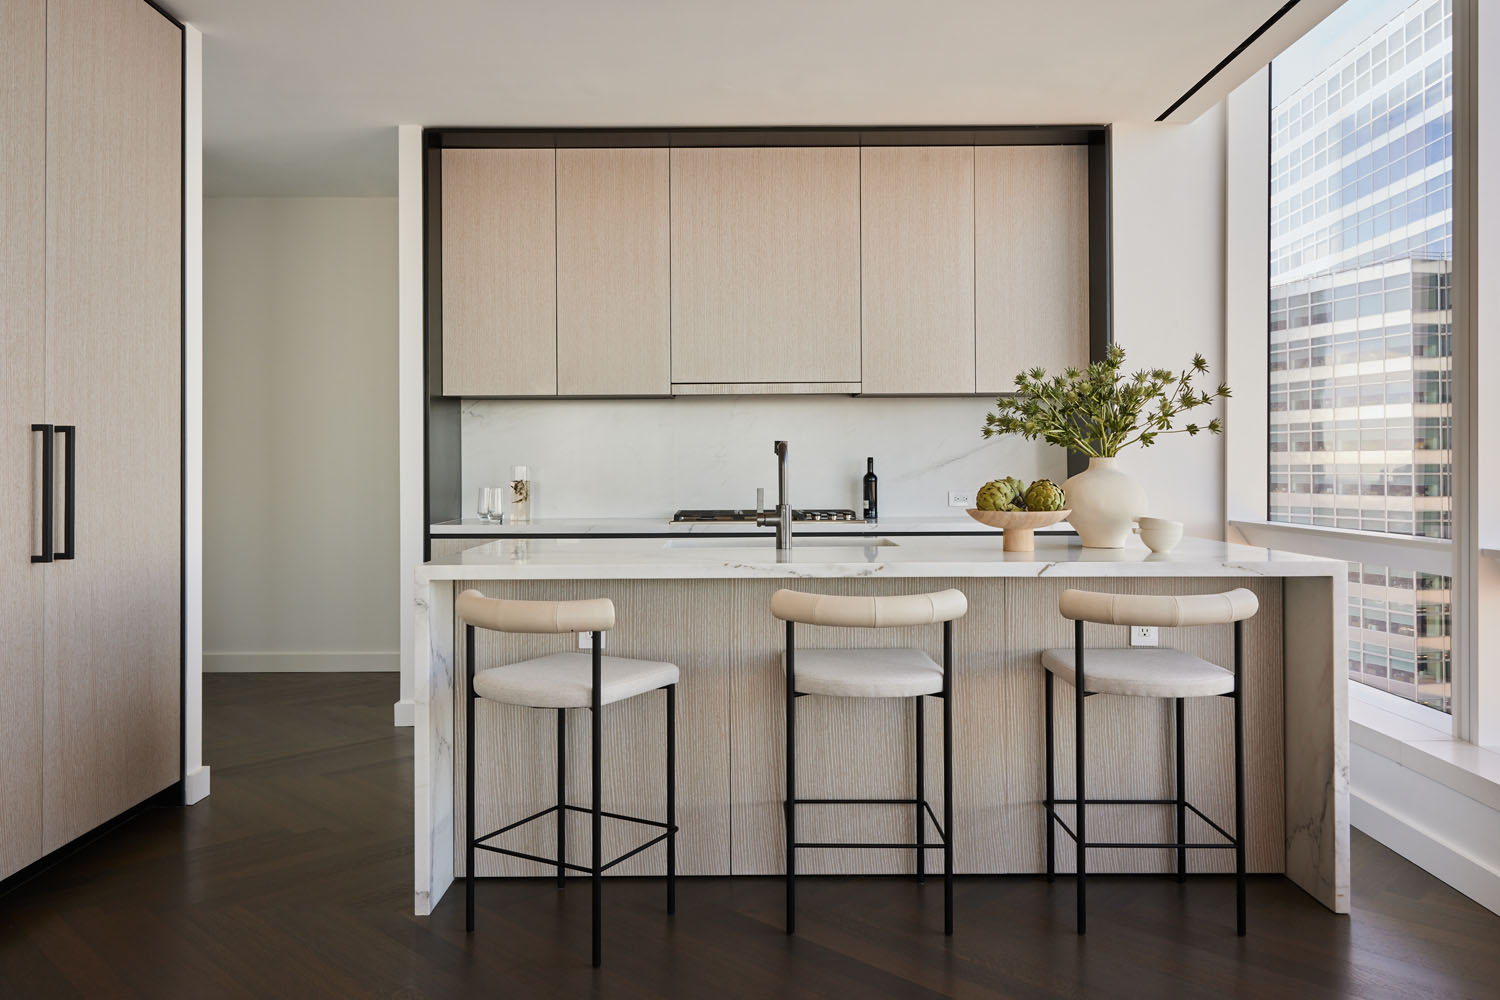 Modern kitchen in neutral tones featuring upholstered bar chairs